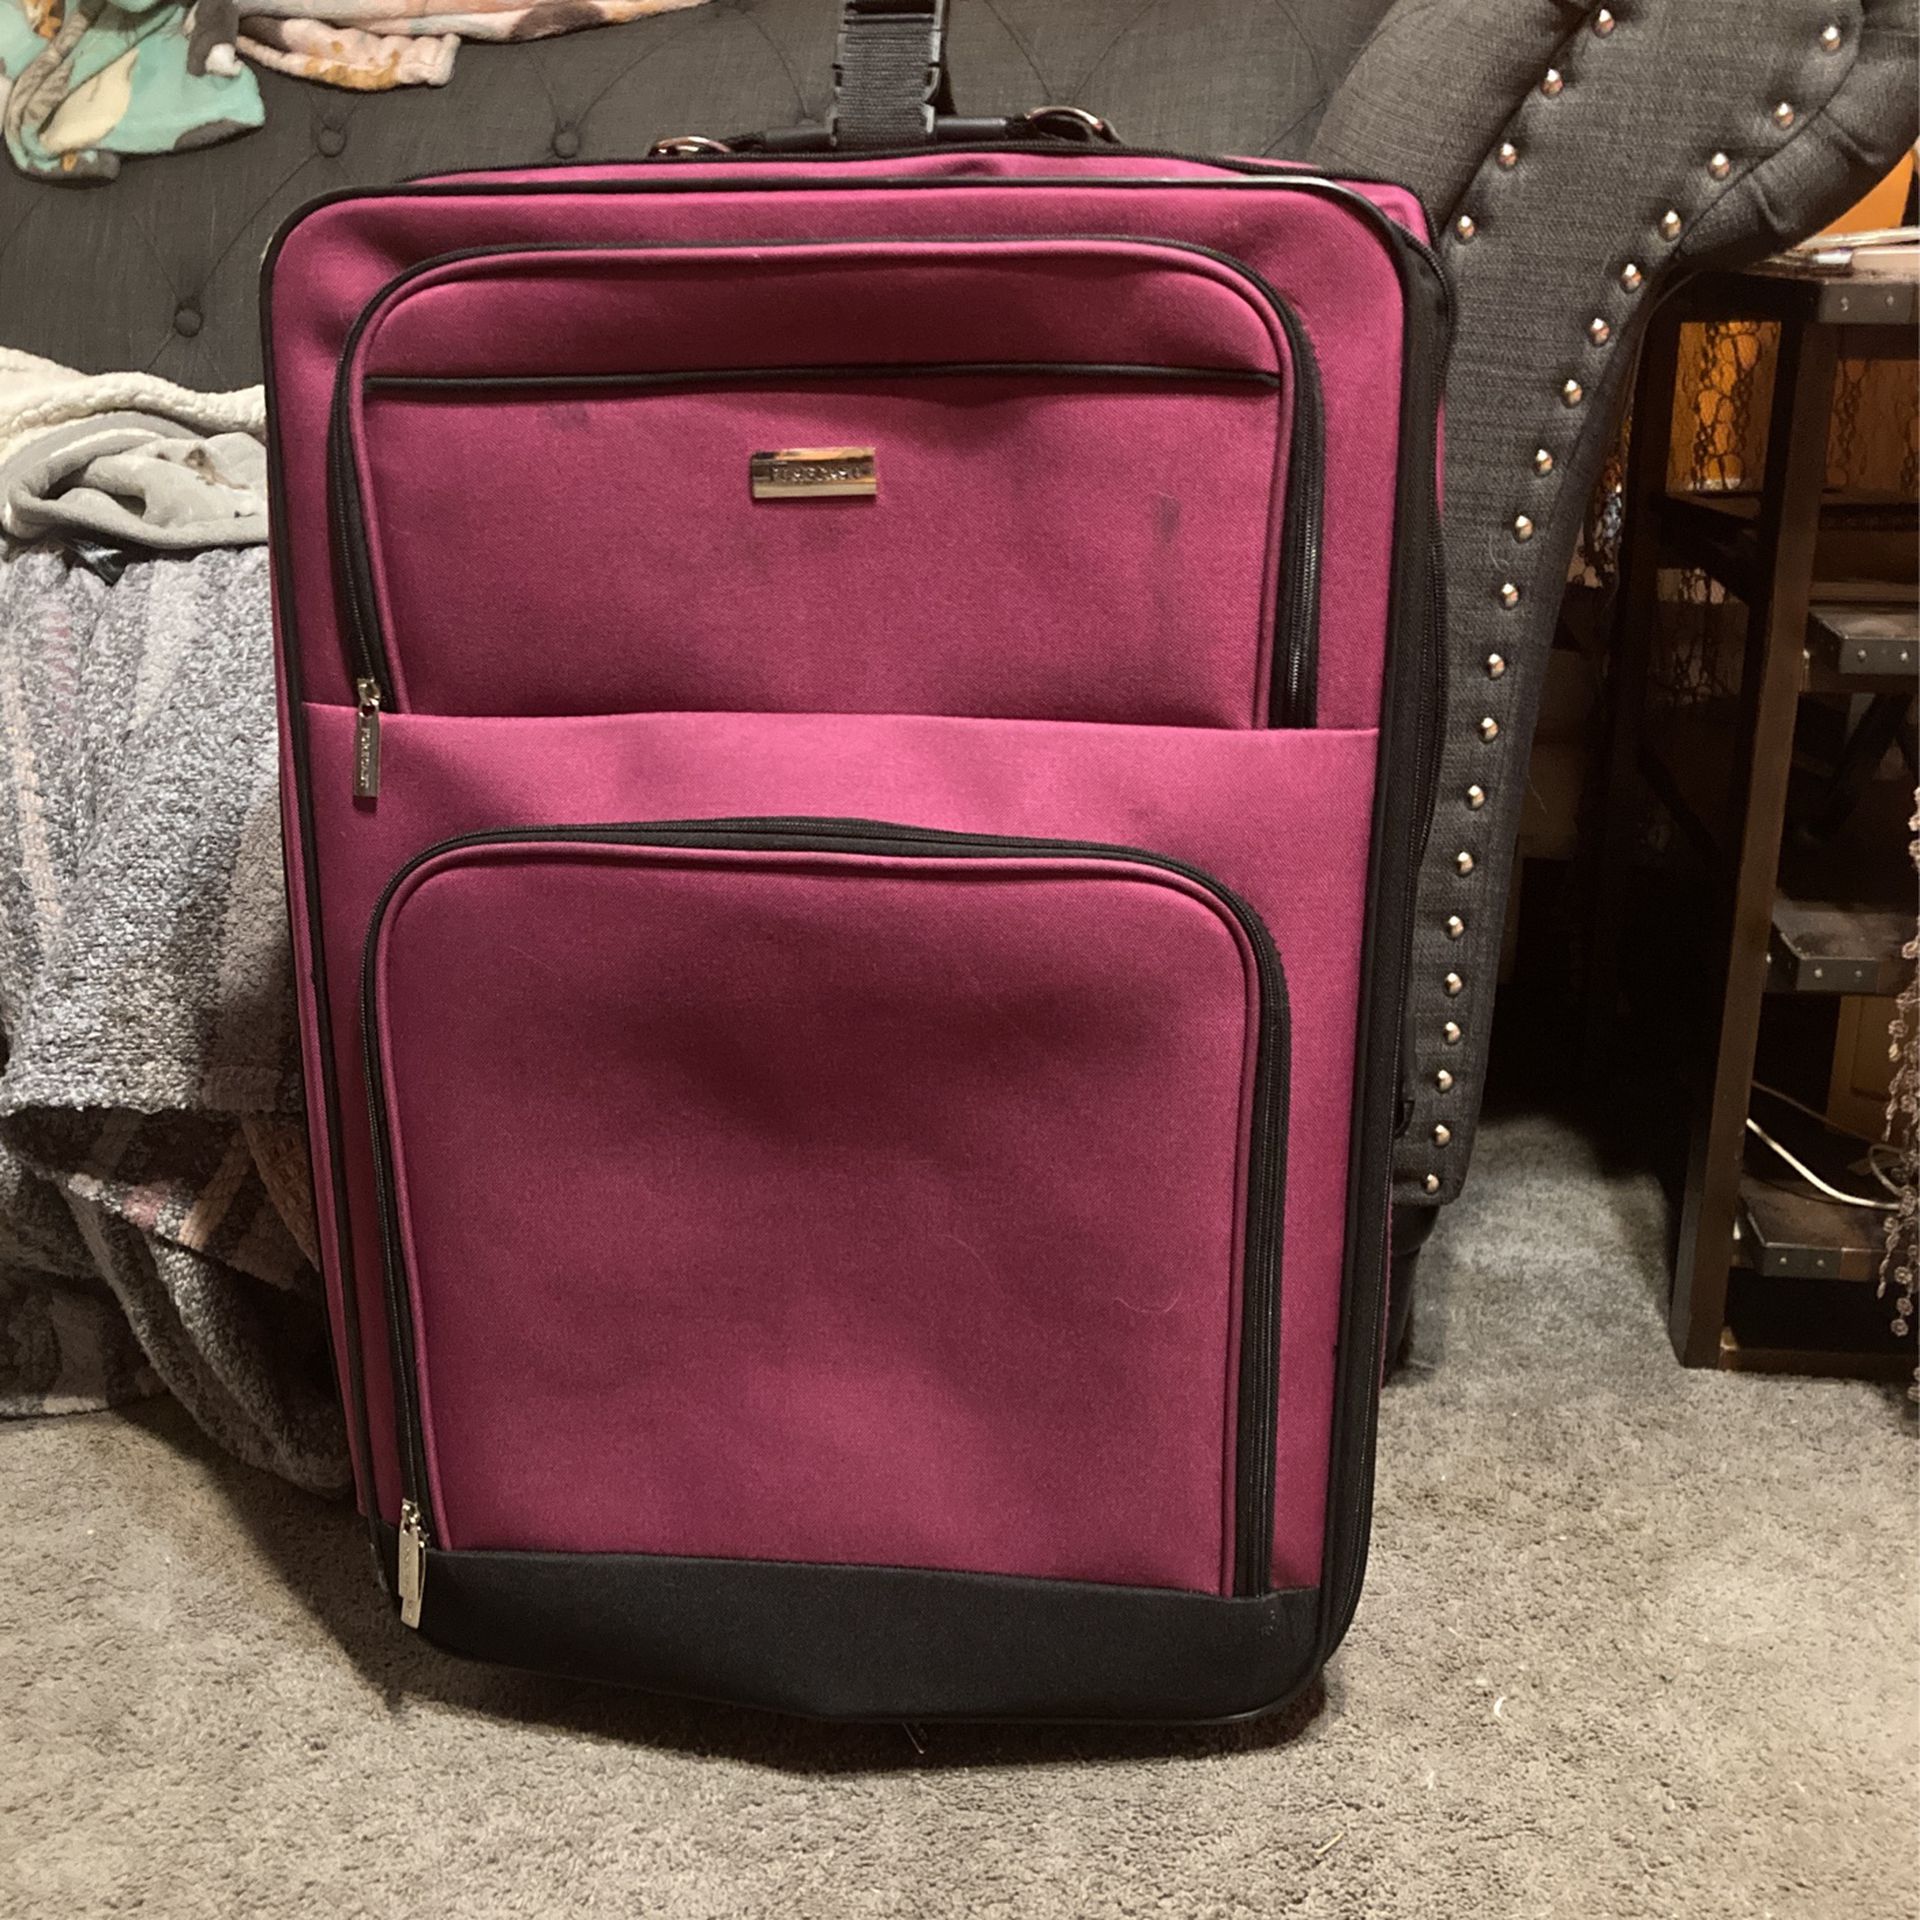 Pink Big Suitcase By Forecast 